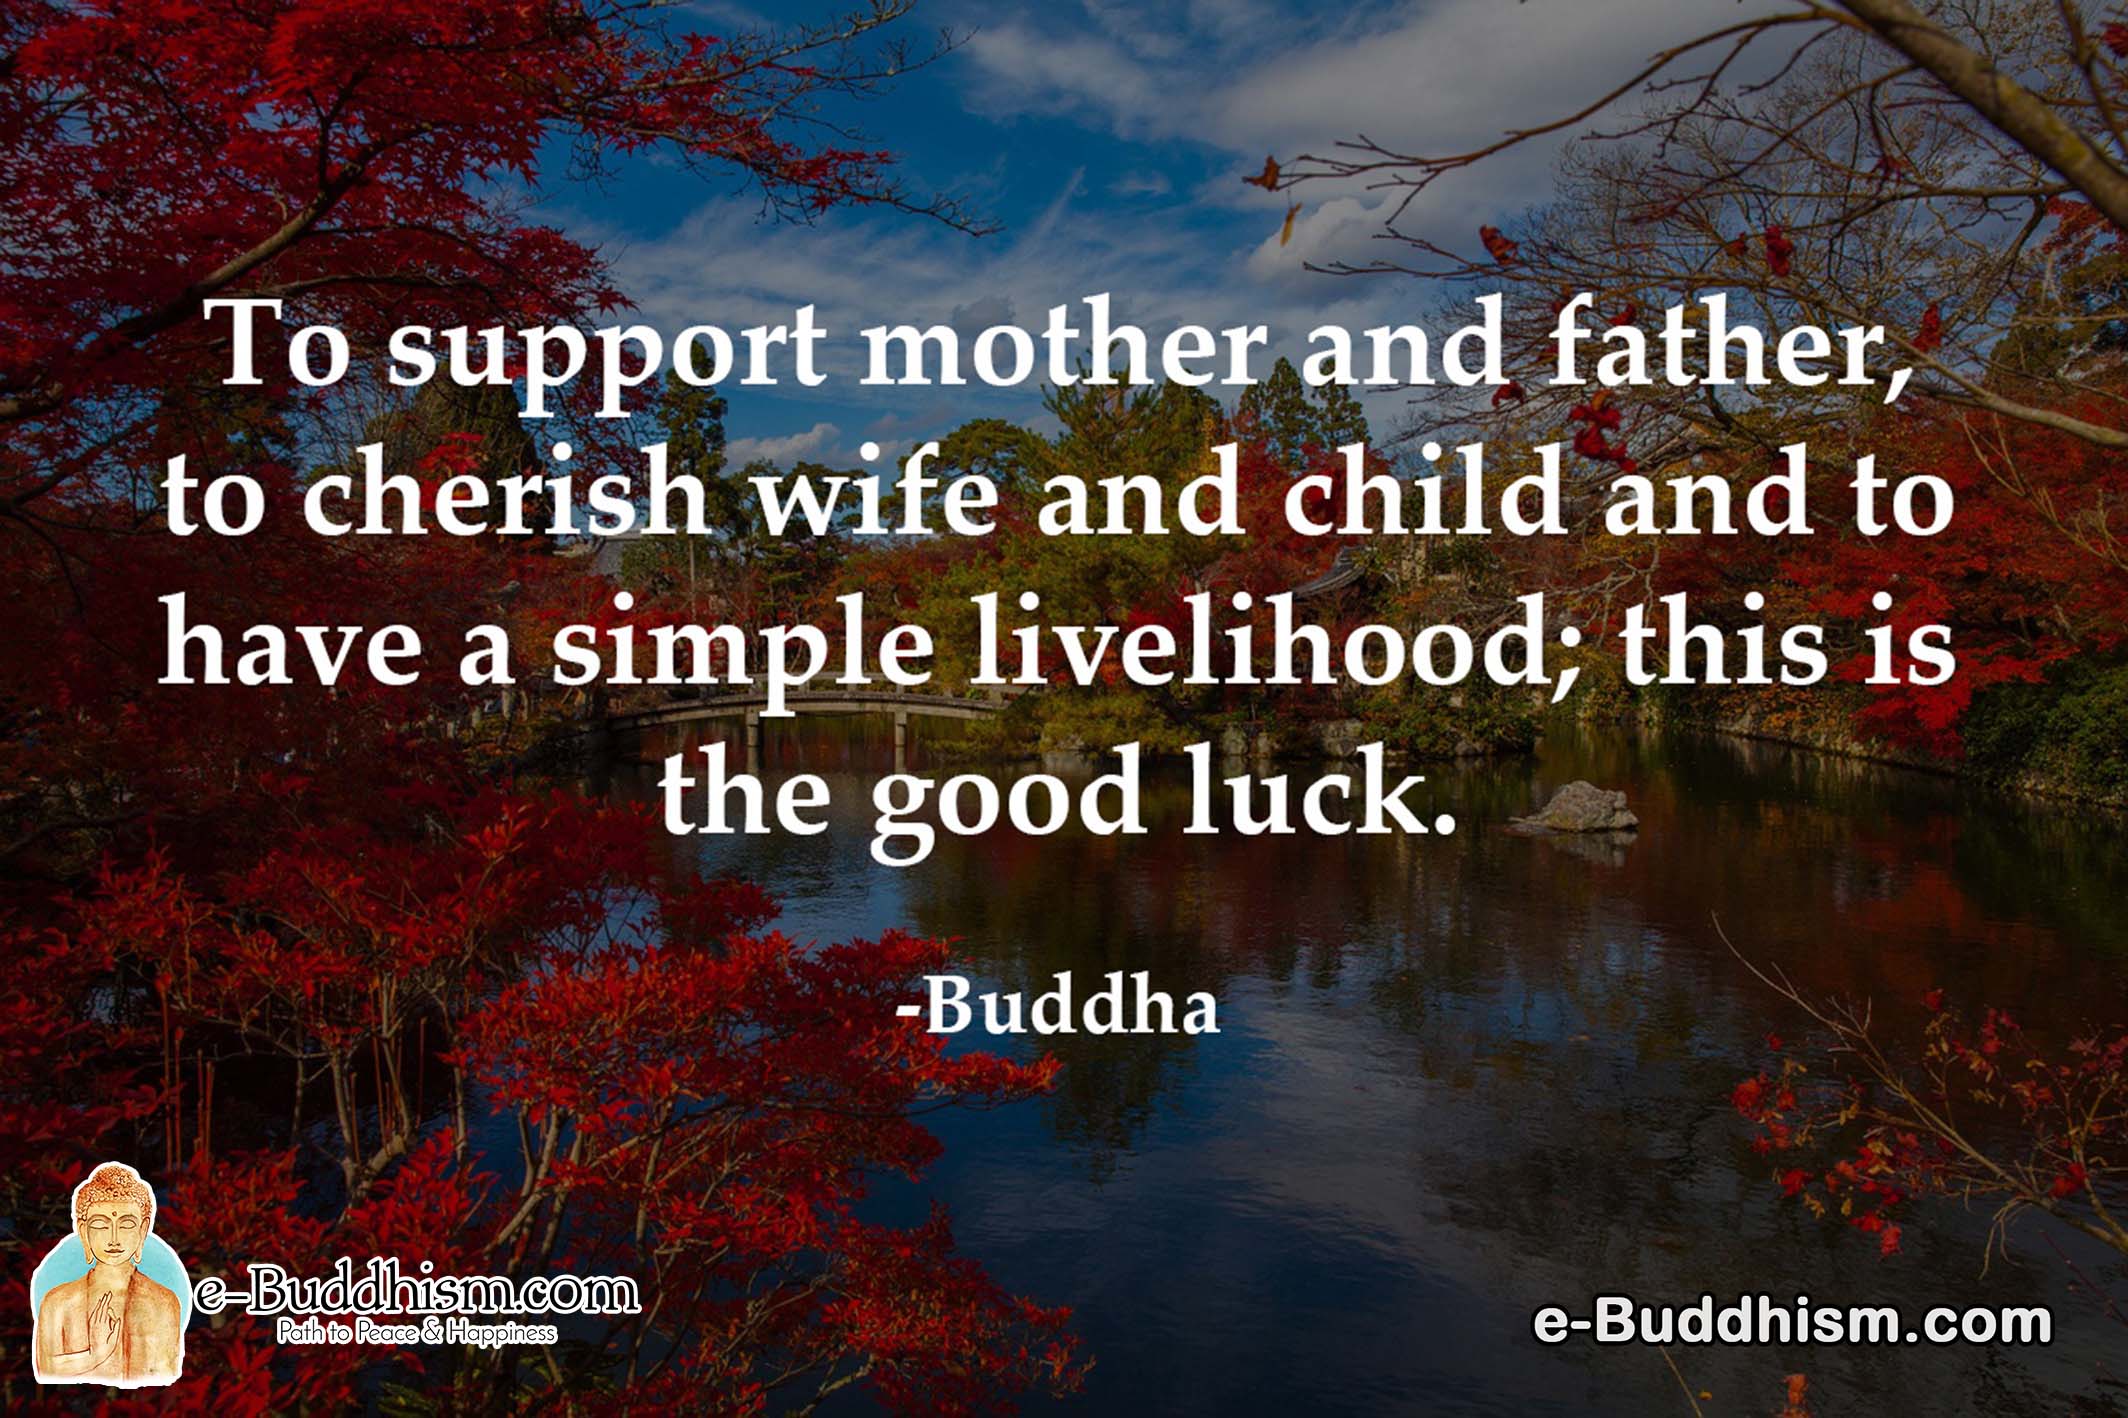 To support mother and father, to cherish wife and child and to have a simple livelihood; this is good luck. -Buddha